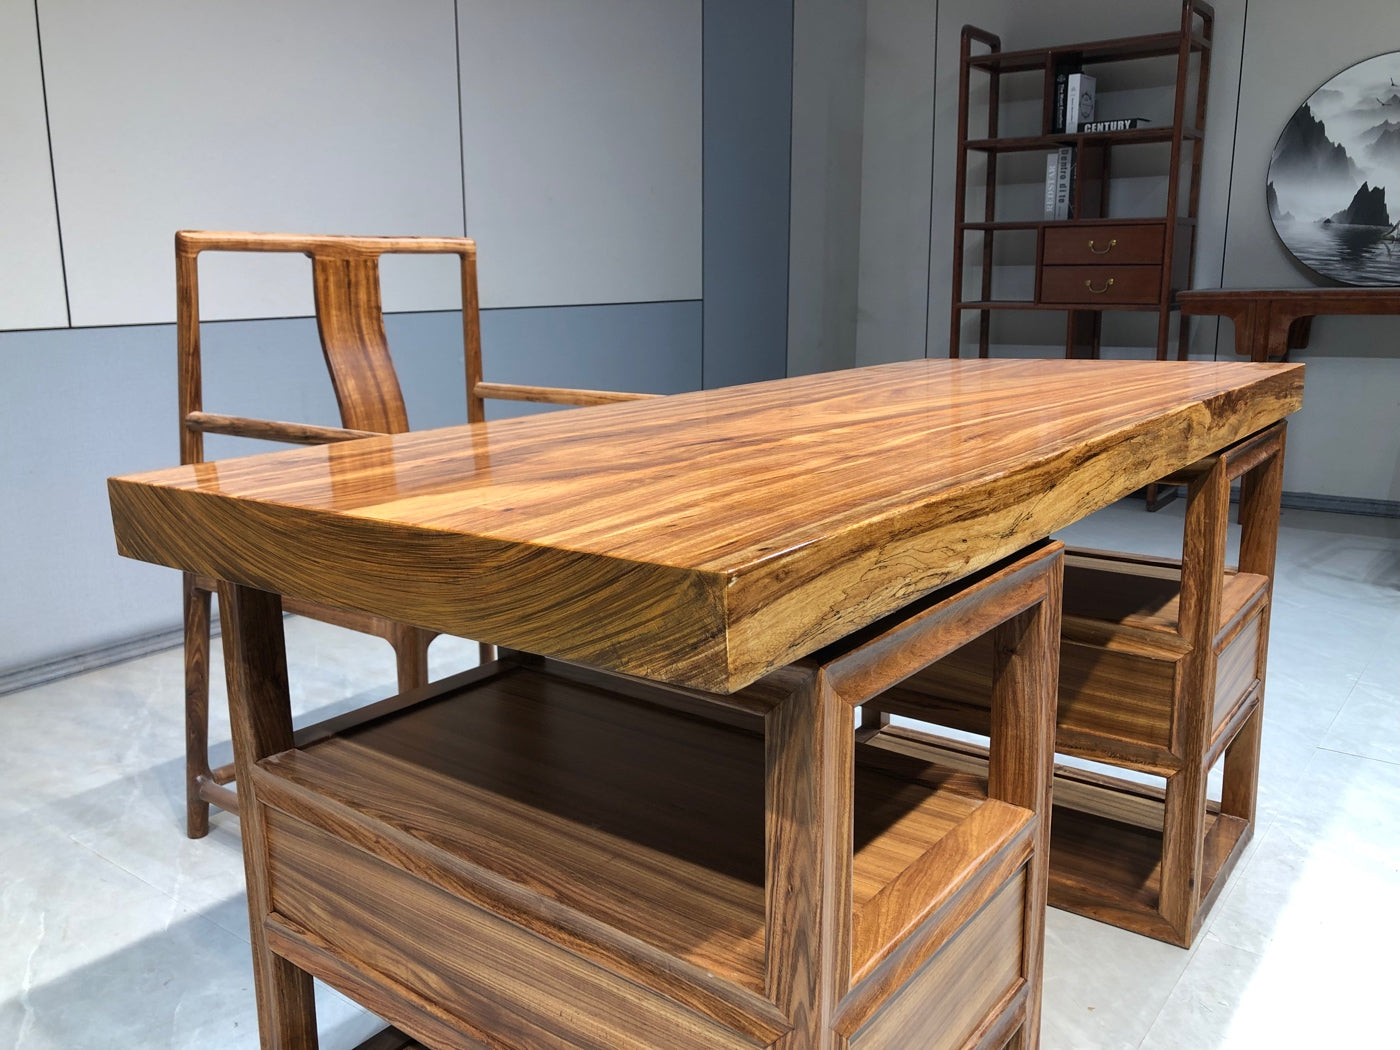 Flat slab, slab table top, dining table, Western Africa wood table